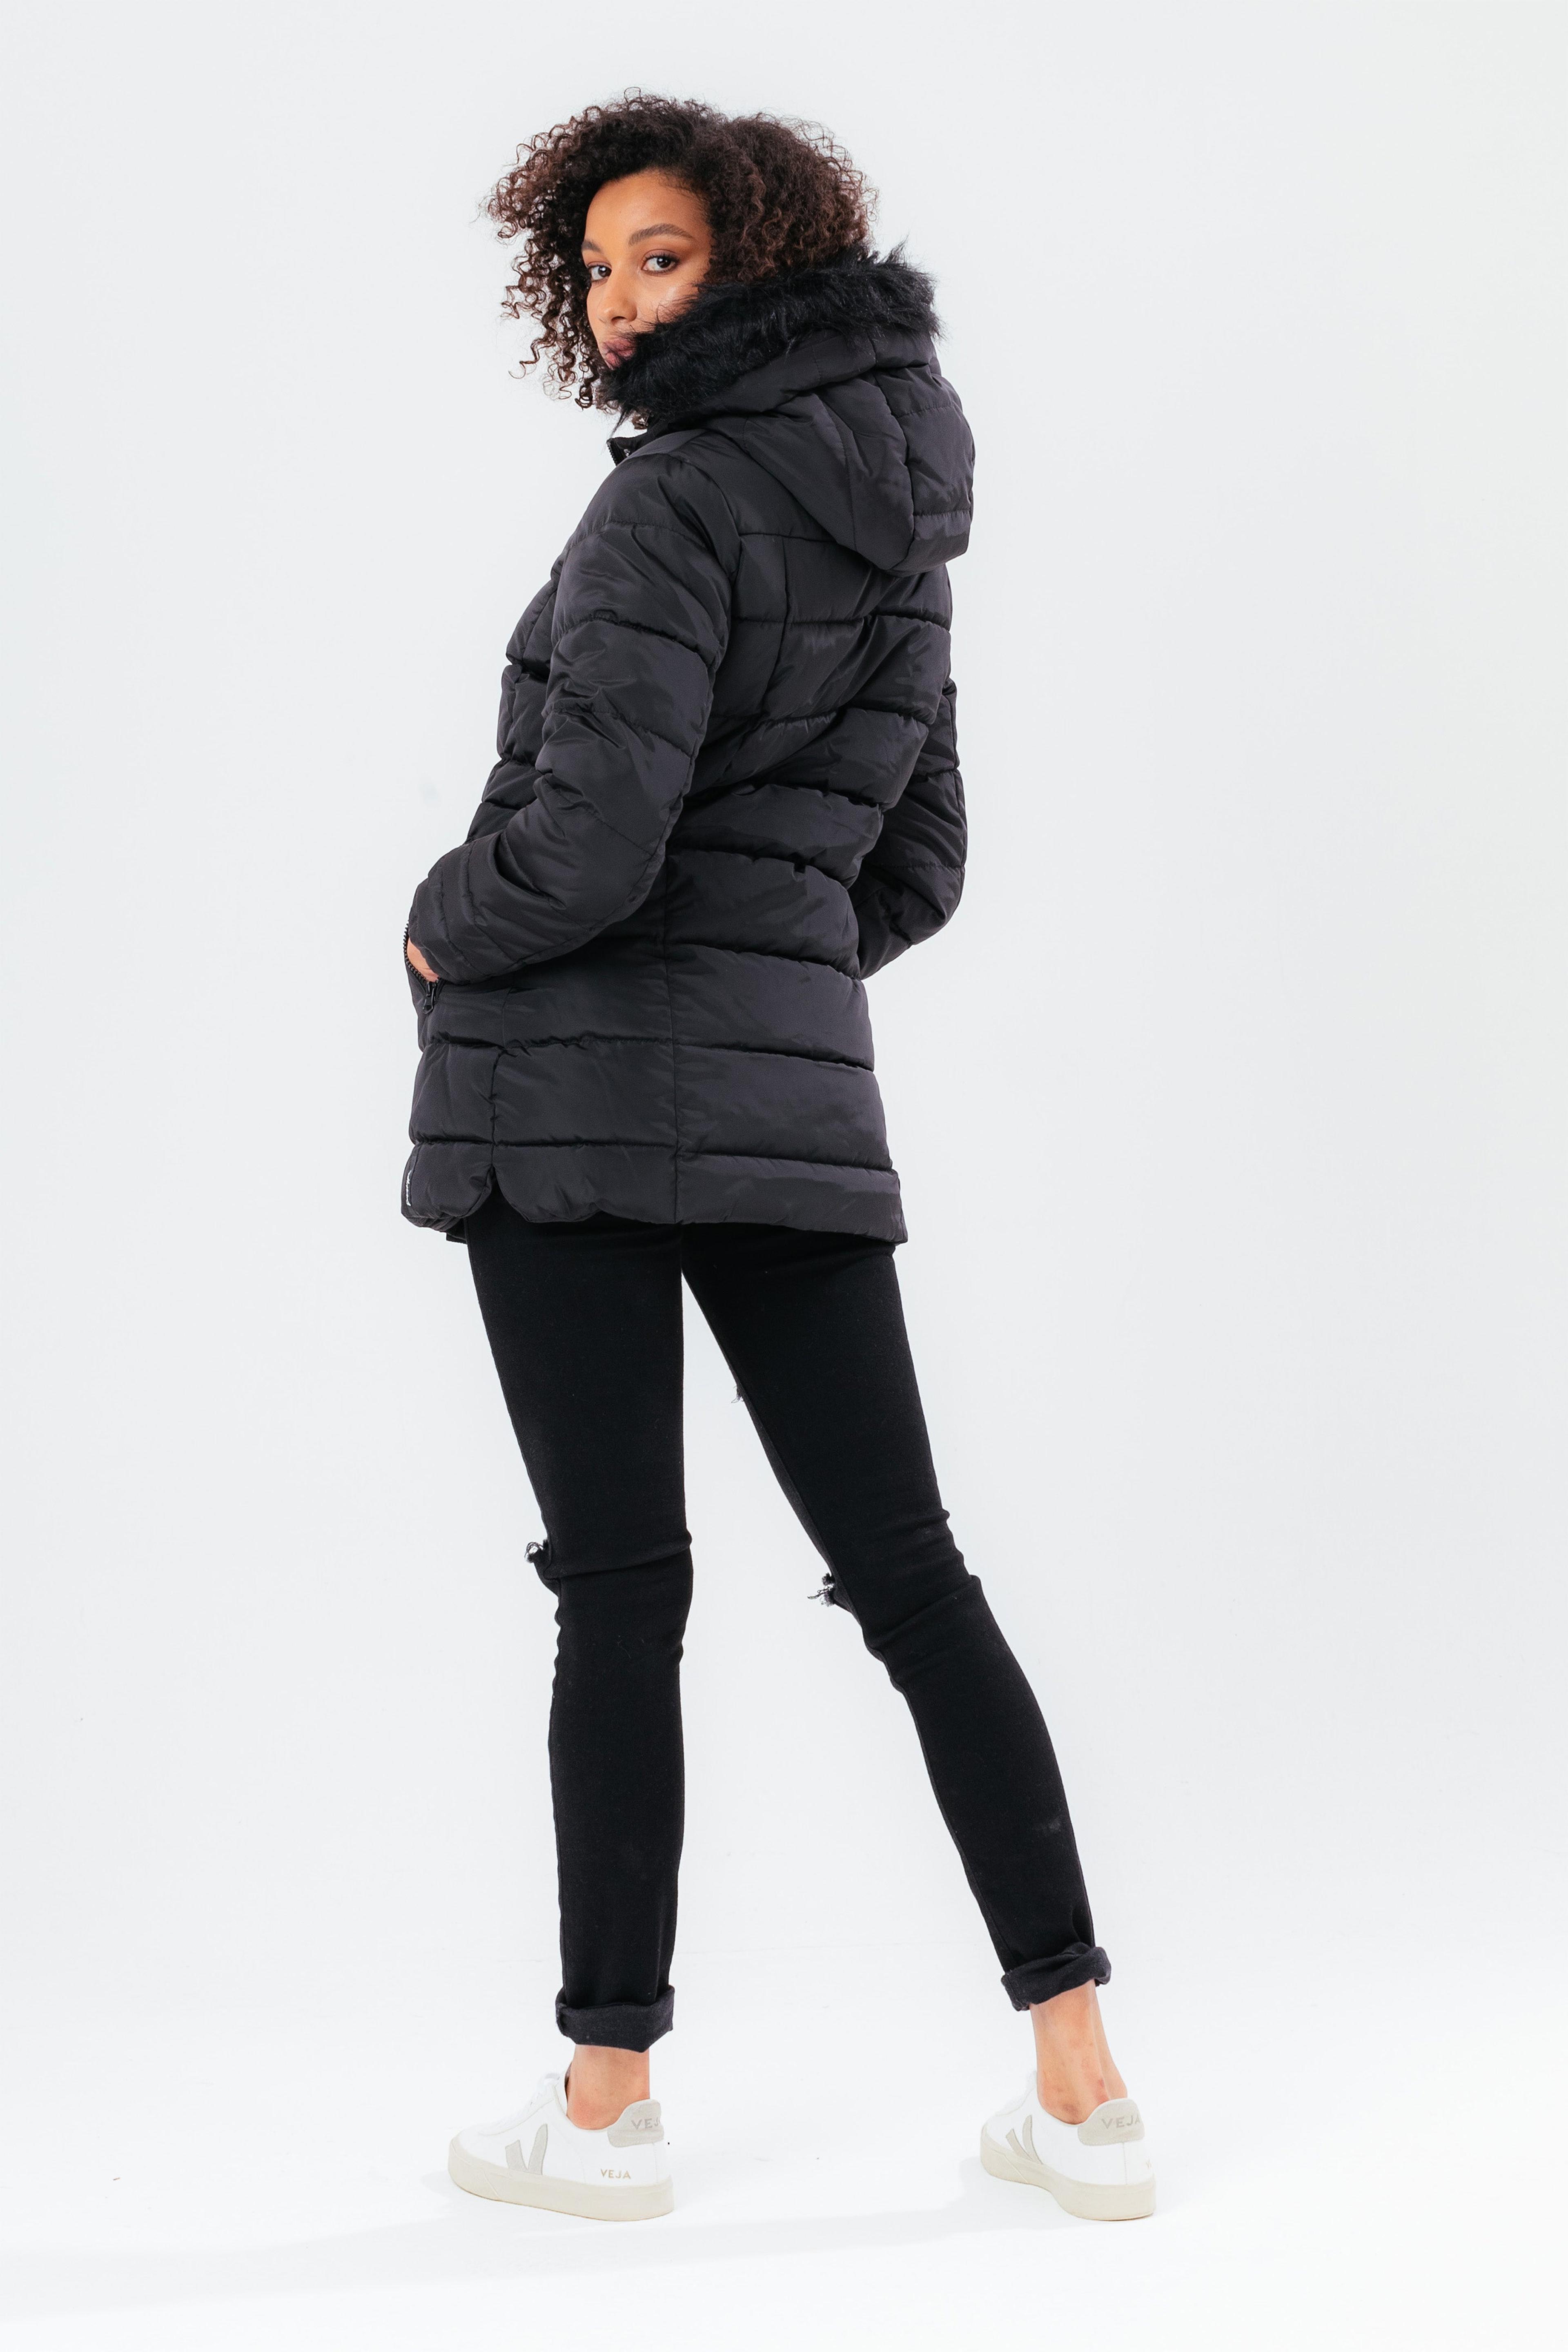 Alternate View 2 of HYPE BLACK MID LENGTH WOMEN'S PADDED COAT WITH FUR